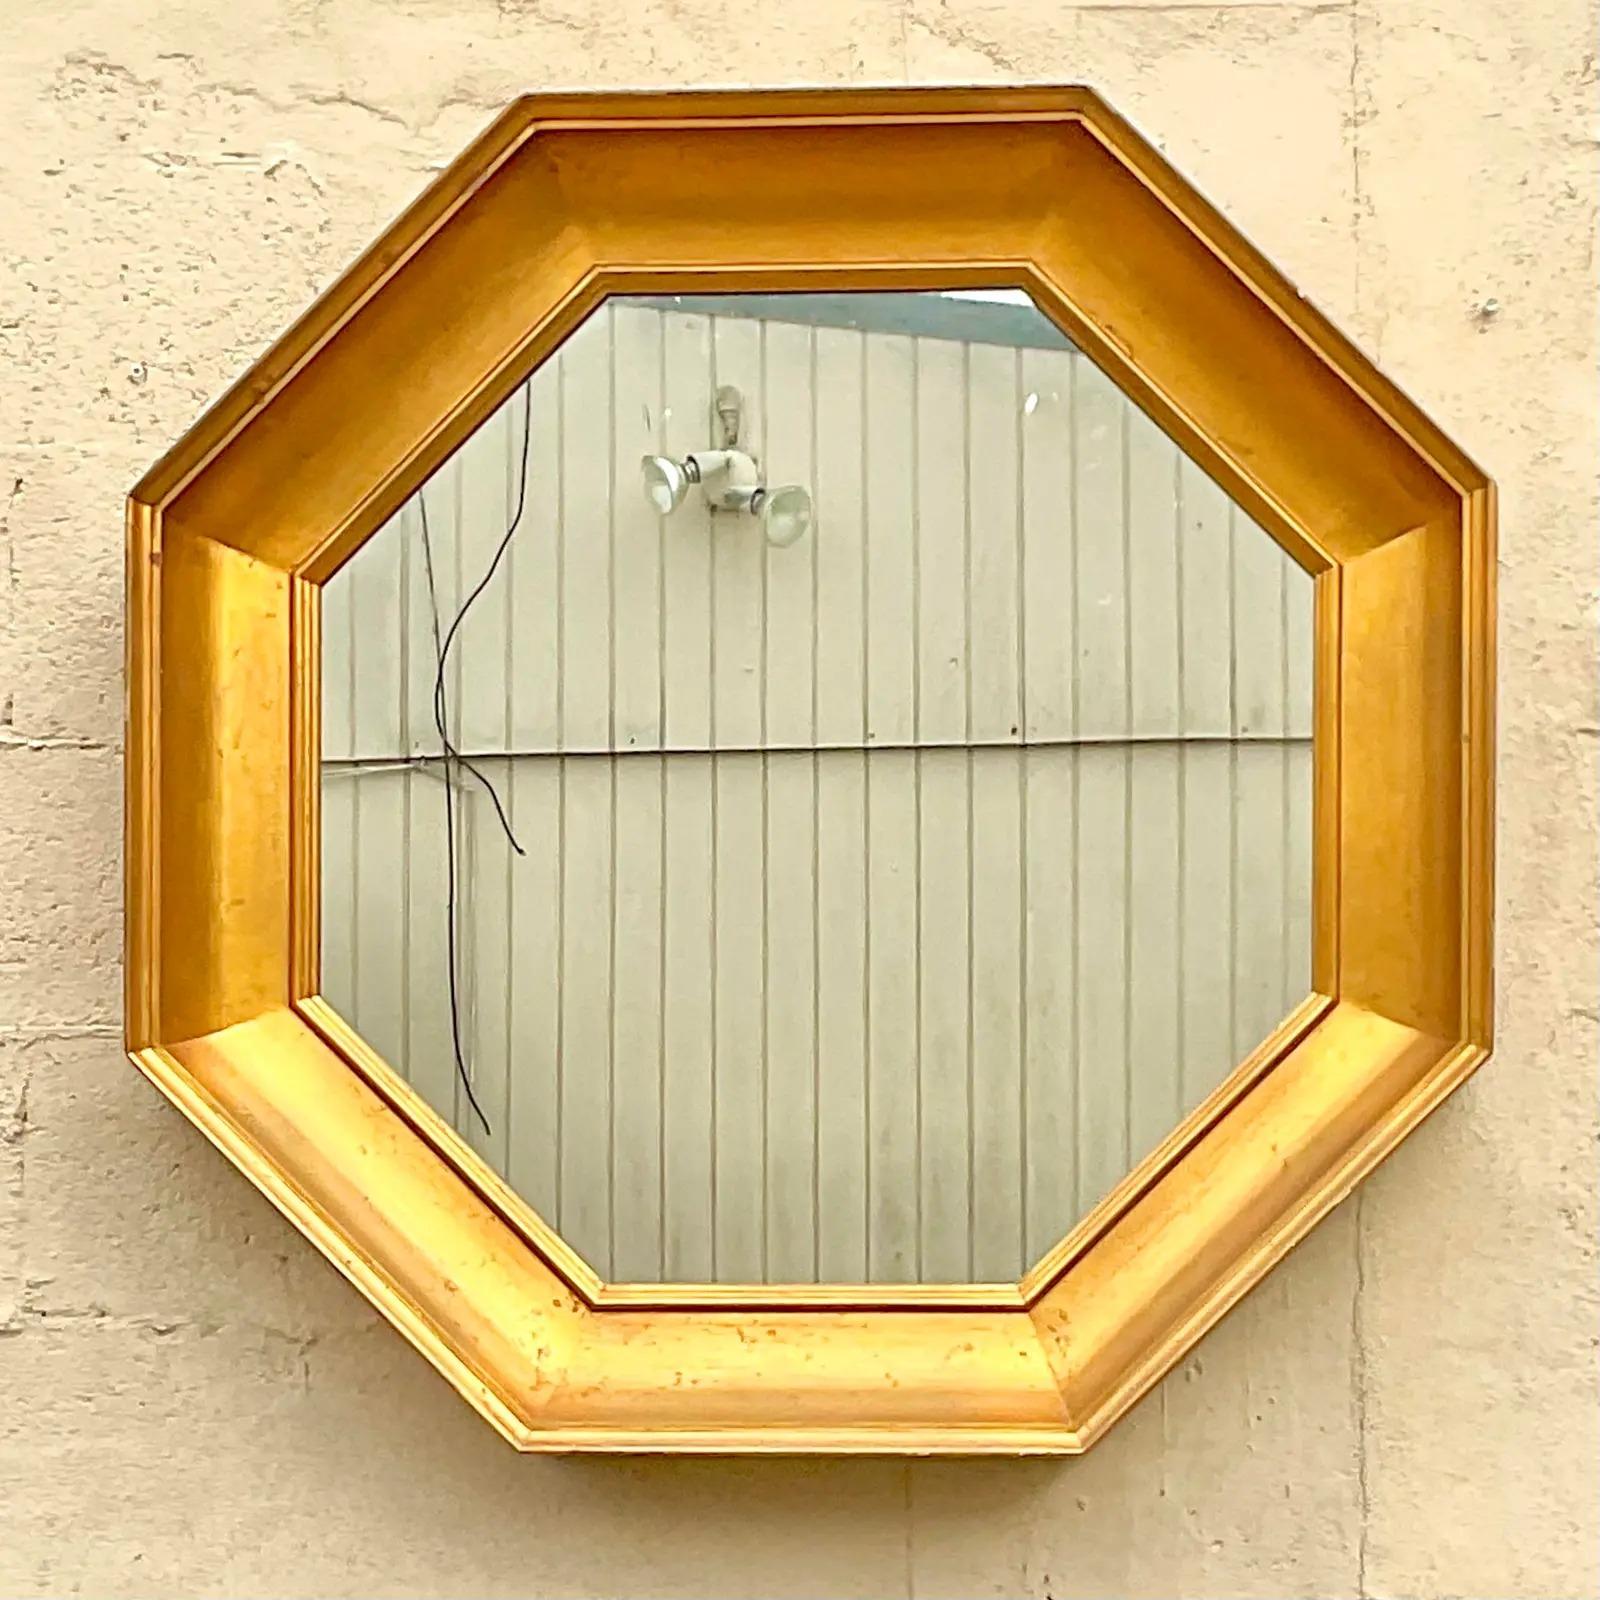 A fantastic vintage Gilt octagon mirror. Made by the legendary John Widdicomb. Tagged on the back. Acquired from a Palm Beach estate.